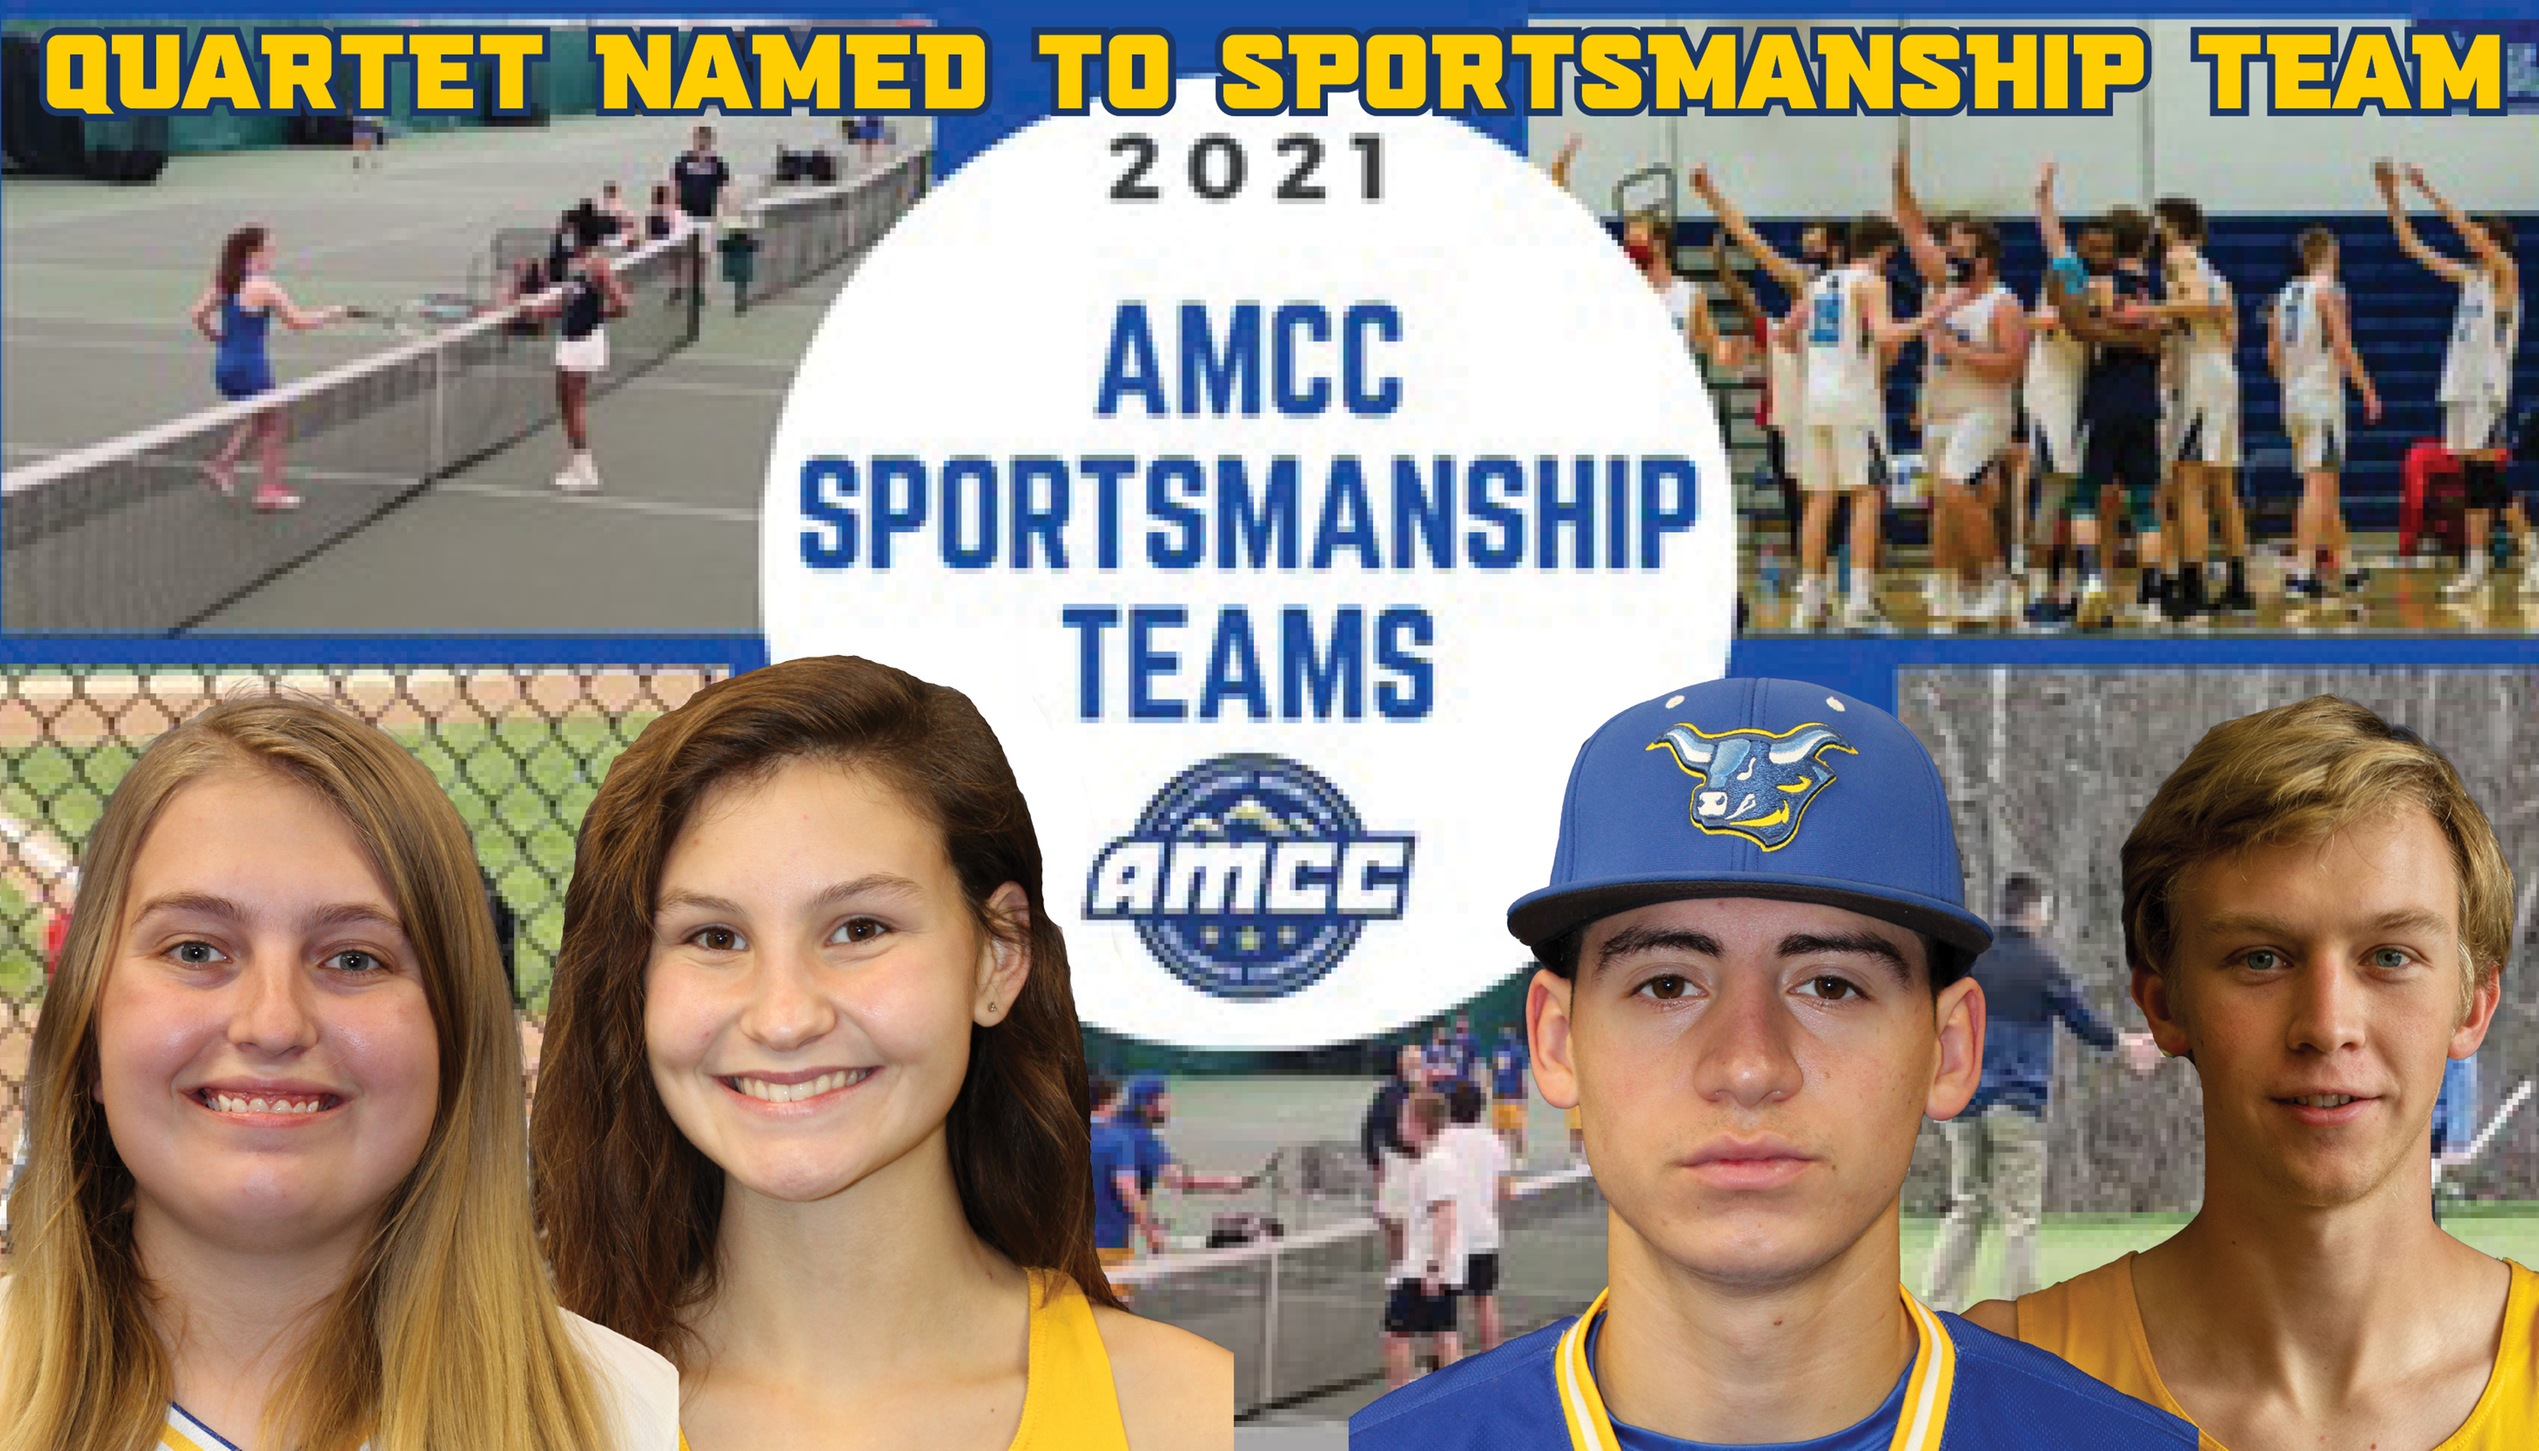 Brittany Fisher, Katie Watkins, Ryan Santiago, and Cooper Buckley (all pictured) have been named to the 2021 All-Sportsmanship Team.